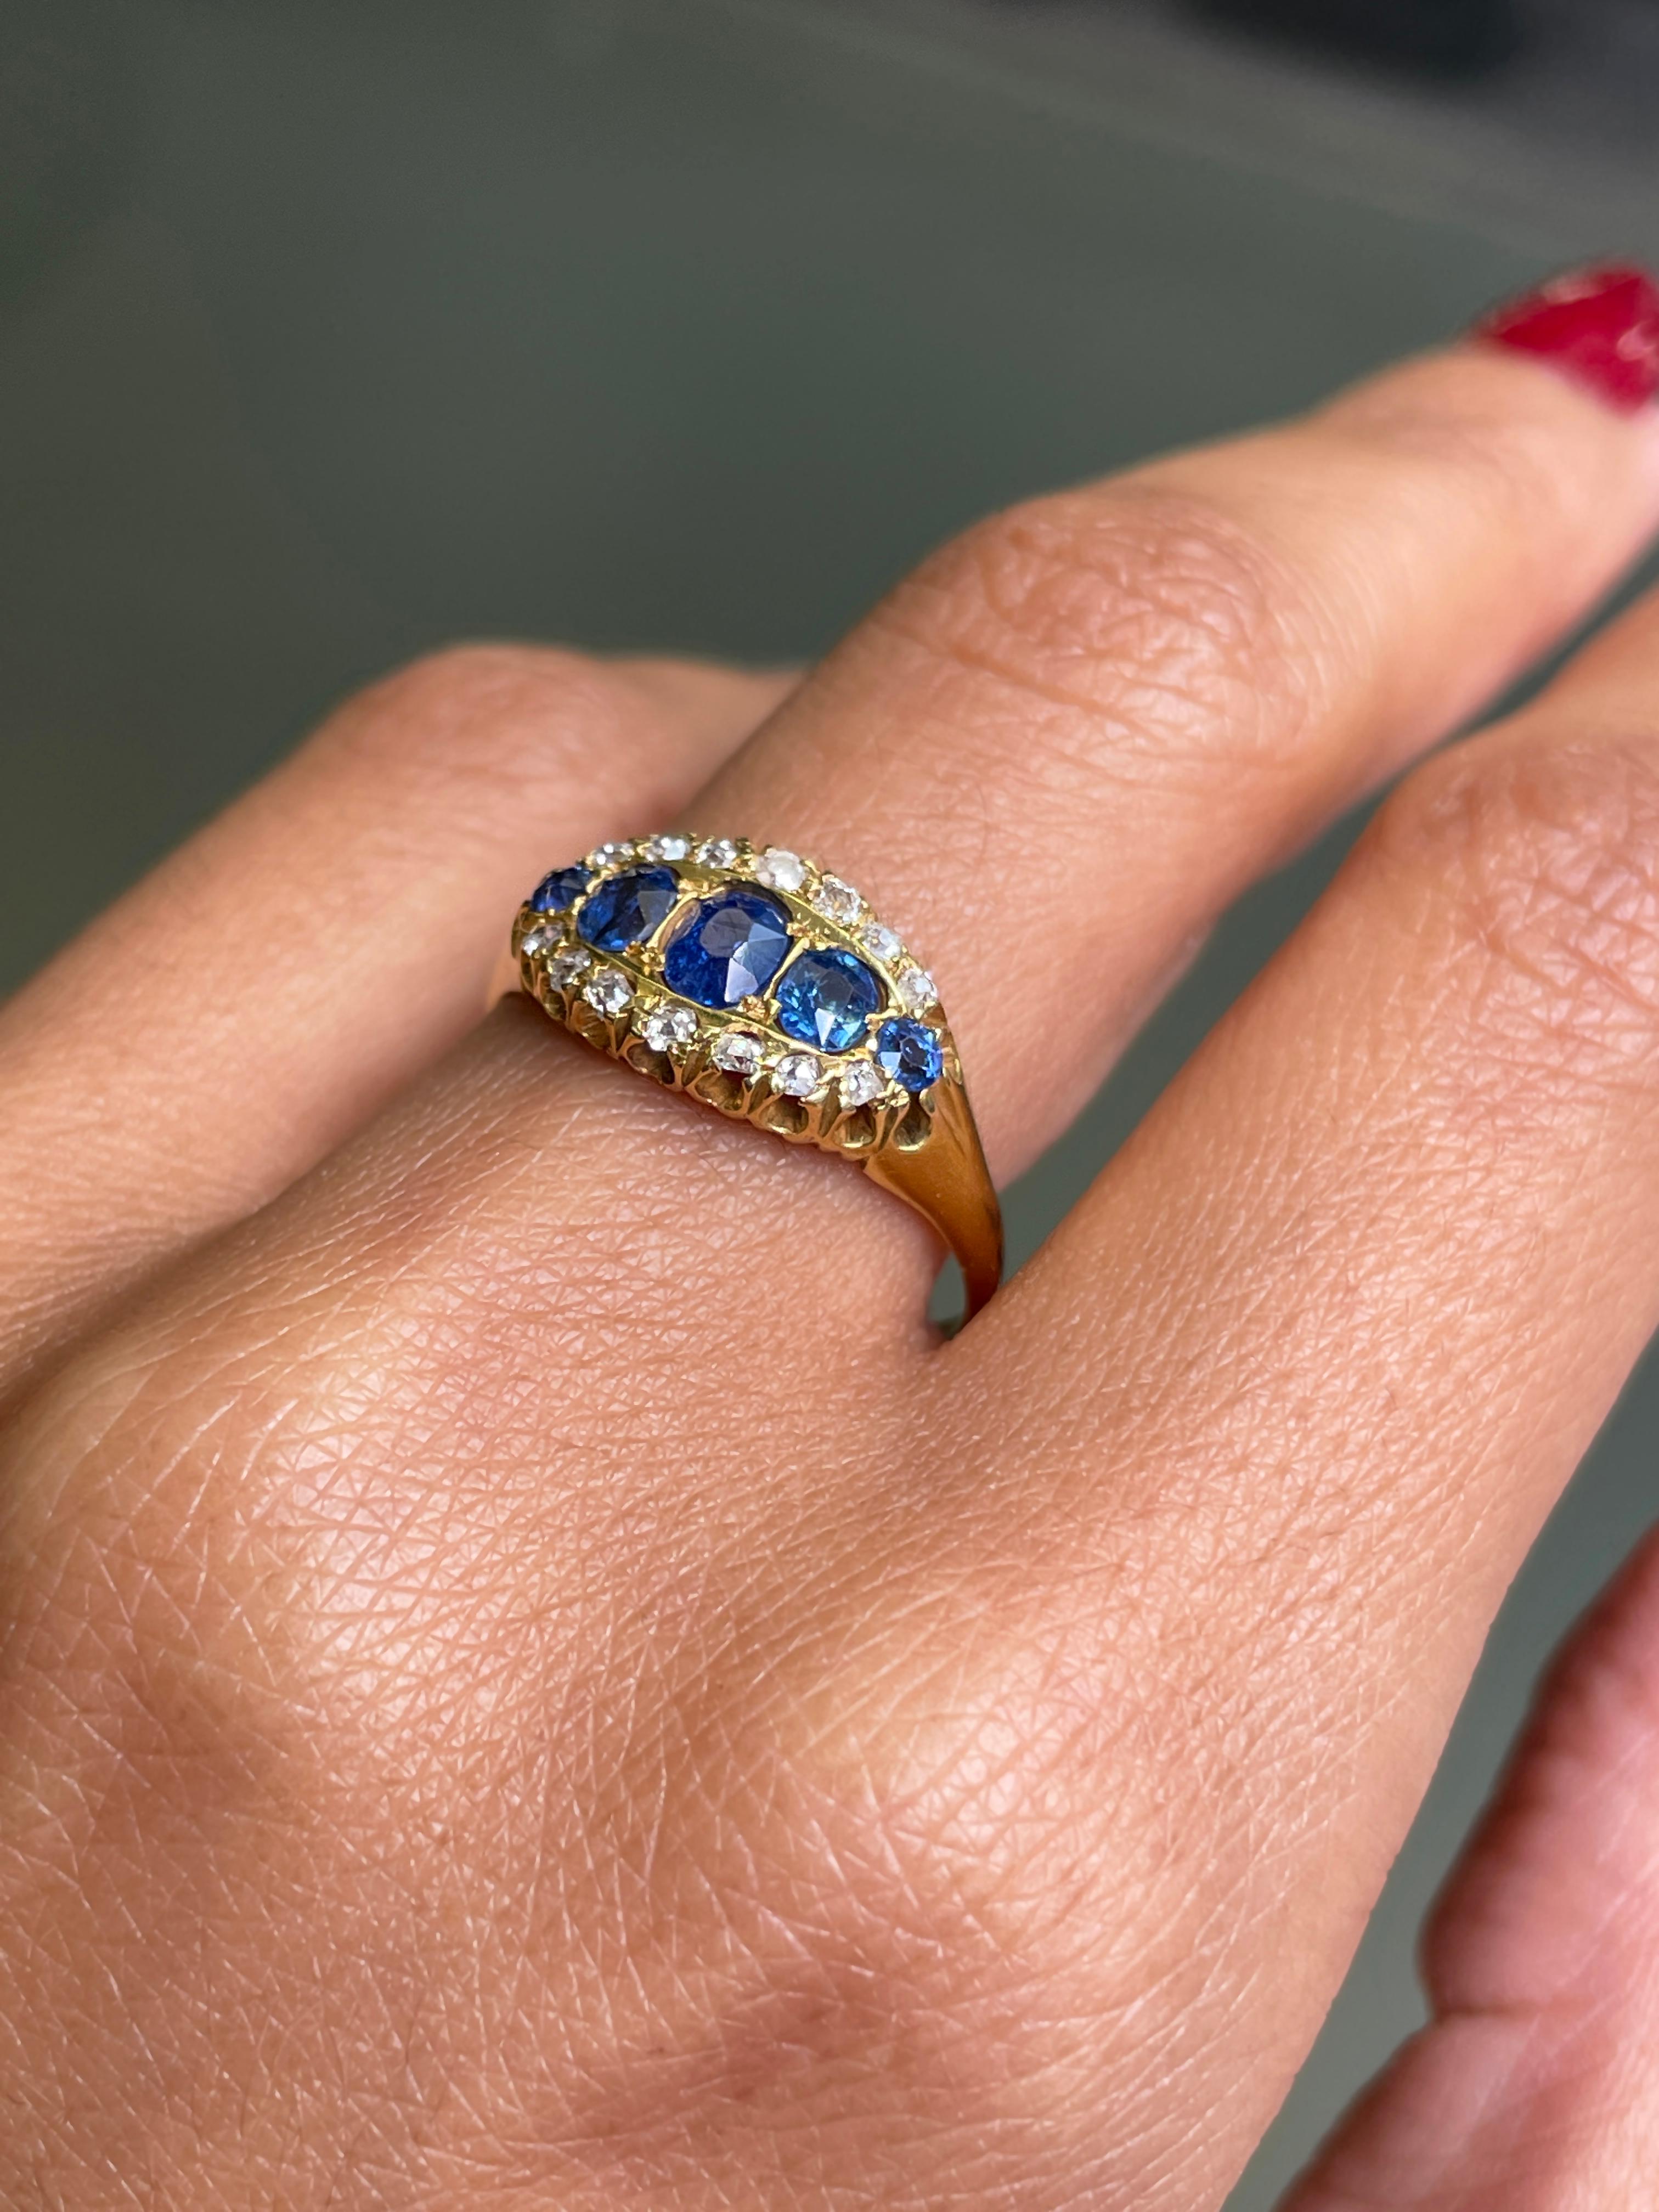 Antique Blue Sapphire and Old Cut Diamond 18 Carat Yellow Gold Ring, Circa 1890s For Sale 1